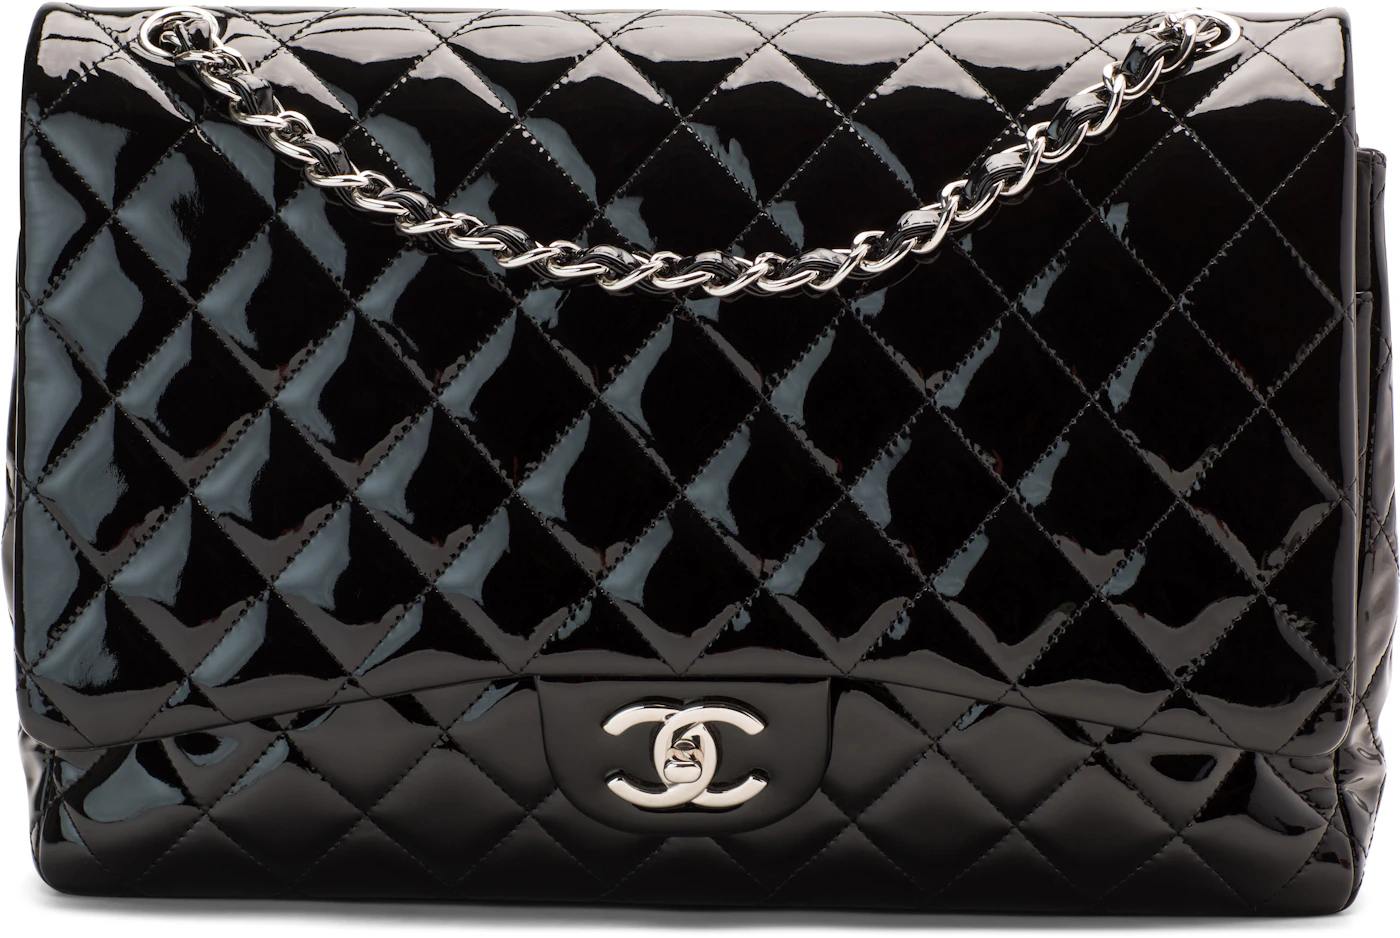 Chanel Black Quilted Patent Leather Maxi Classic Double Flap Bag - Handbag | Pre-owned & Certified | used Second Hand | Unisex